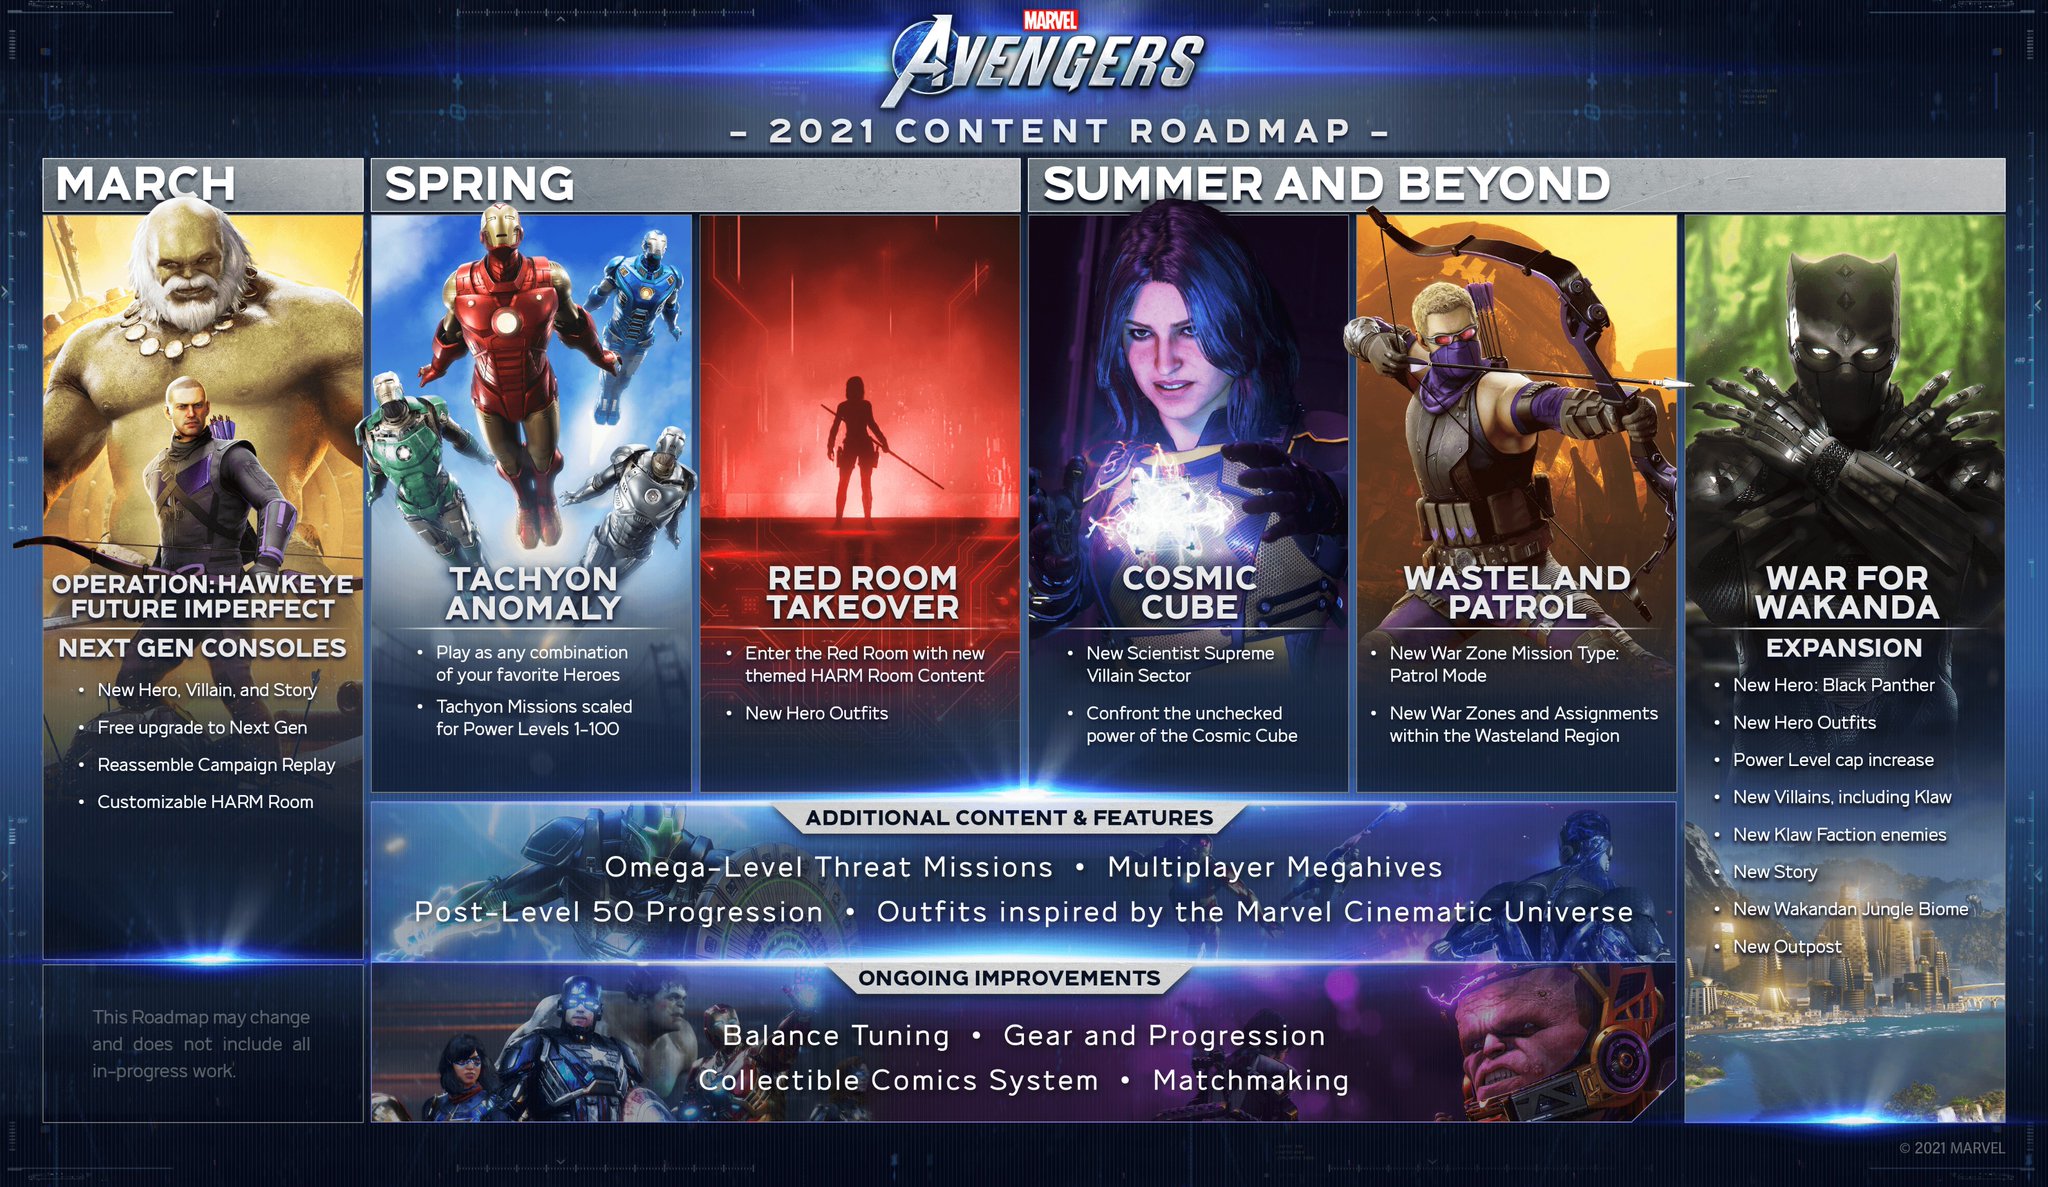 Marvel's Avengers Twitter: "Here is our roadmap for upcoming features! We'll introducing new Villain Sectors, events like the Red Room Takeover, a new Patrol Mode, Black Panther and the